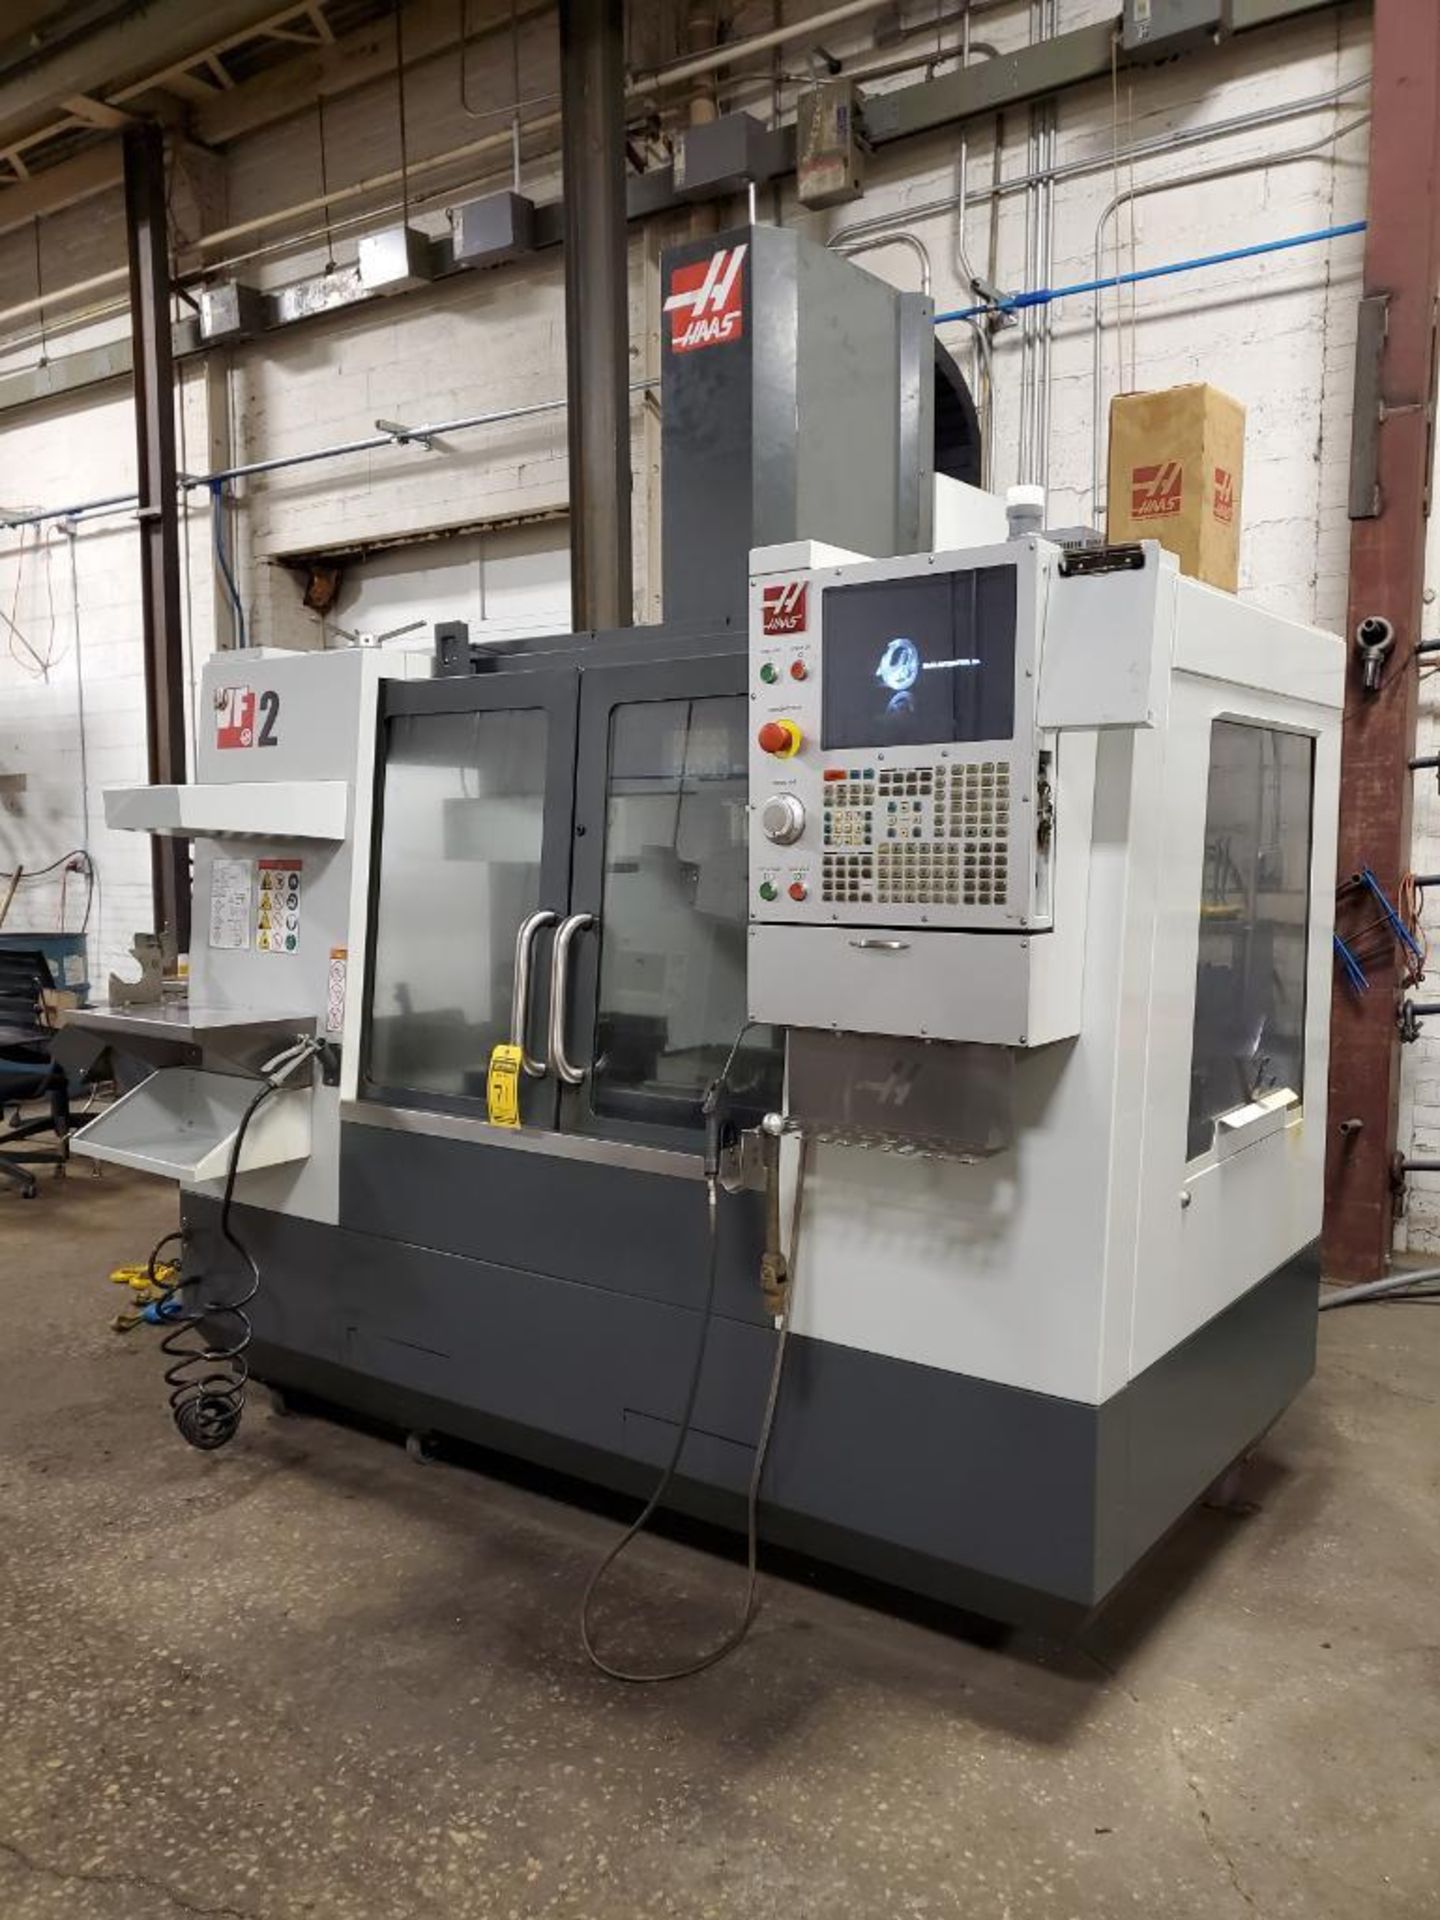 2018 Haas VF2 Vertical CNC Machining Center, s/n 1157725, CT/DIN ISO 40-Taper, 20-Station Tool Holde - Image 4 of 25